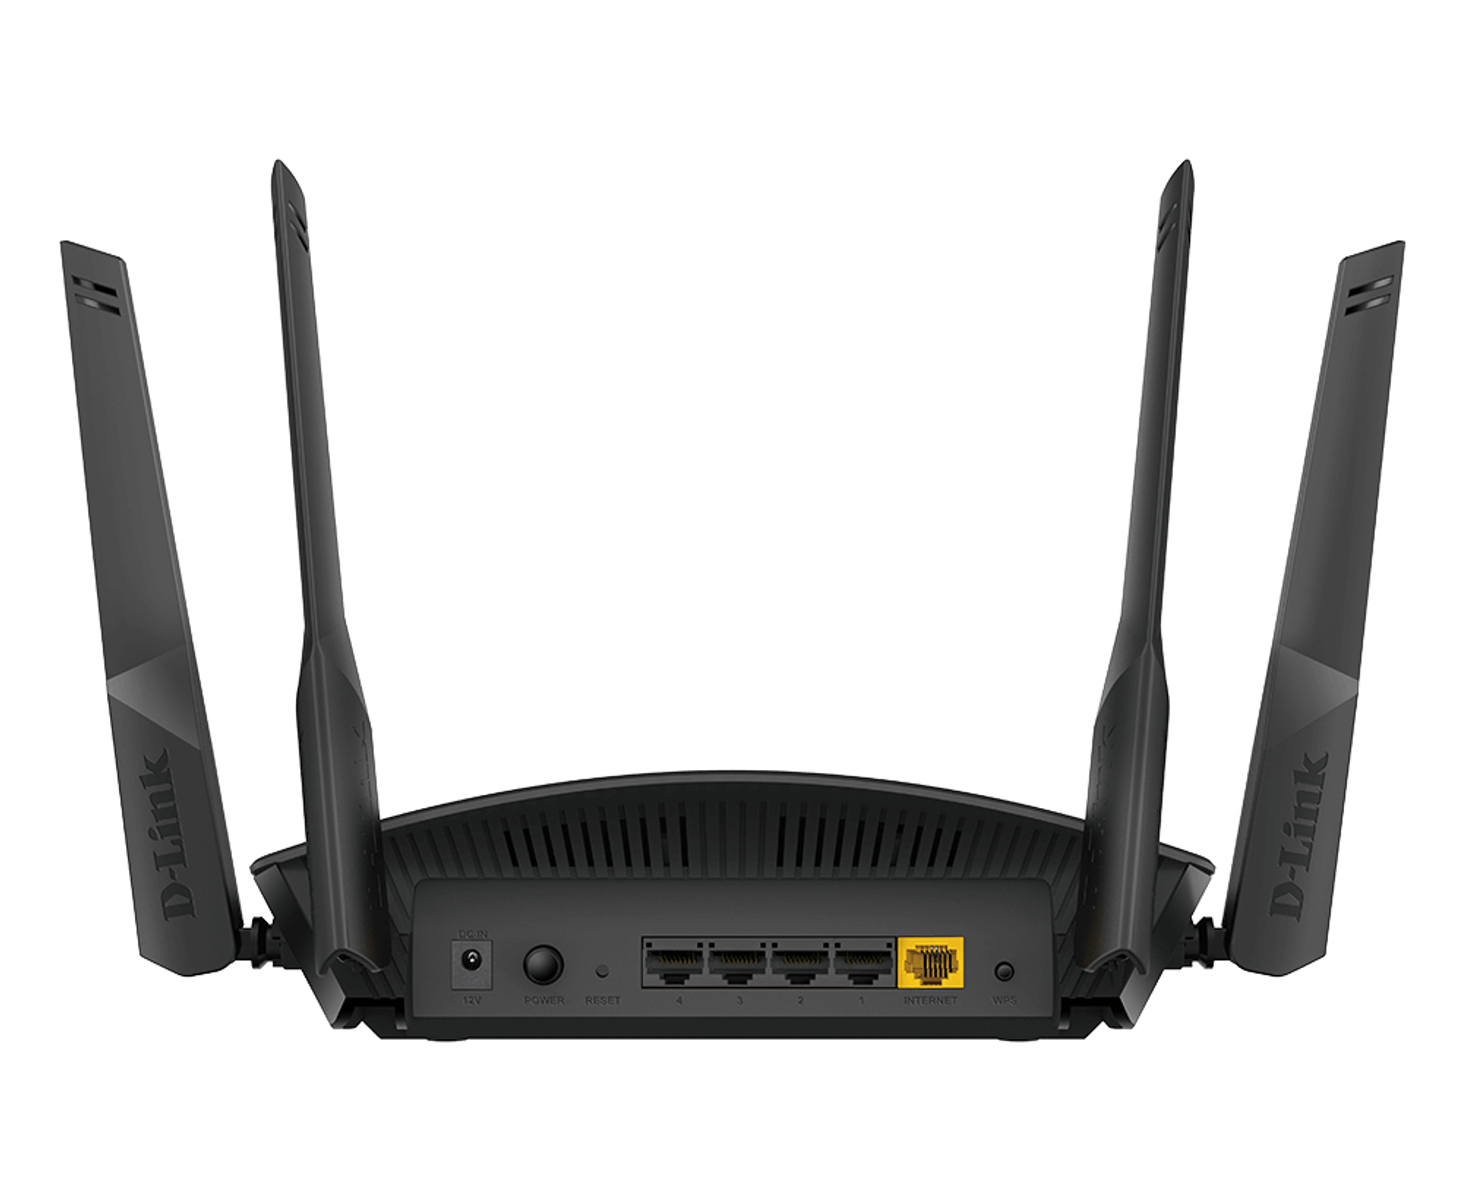 ROUTER WI-FI AX1800 EXO Router 6 D-LINK